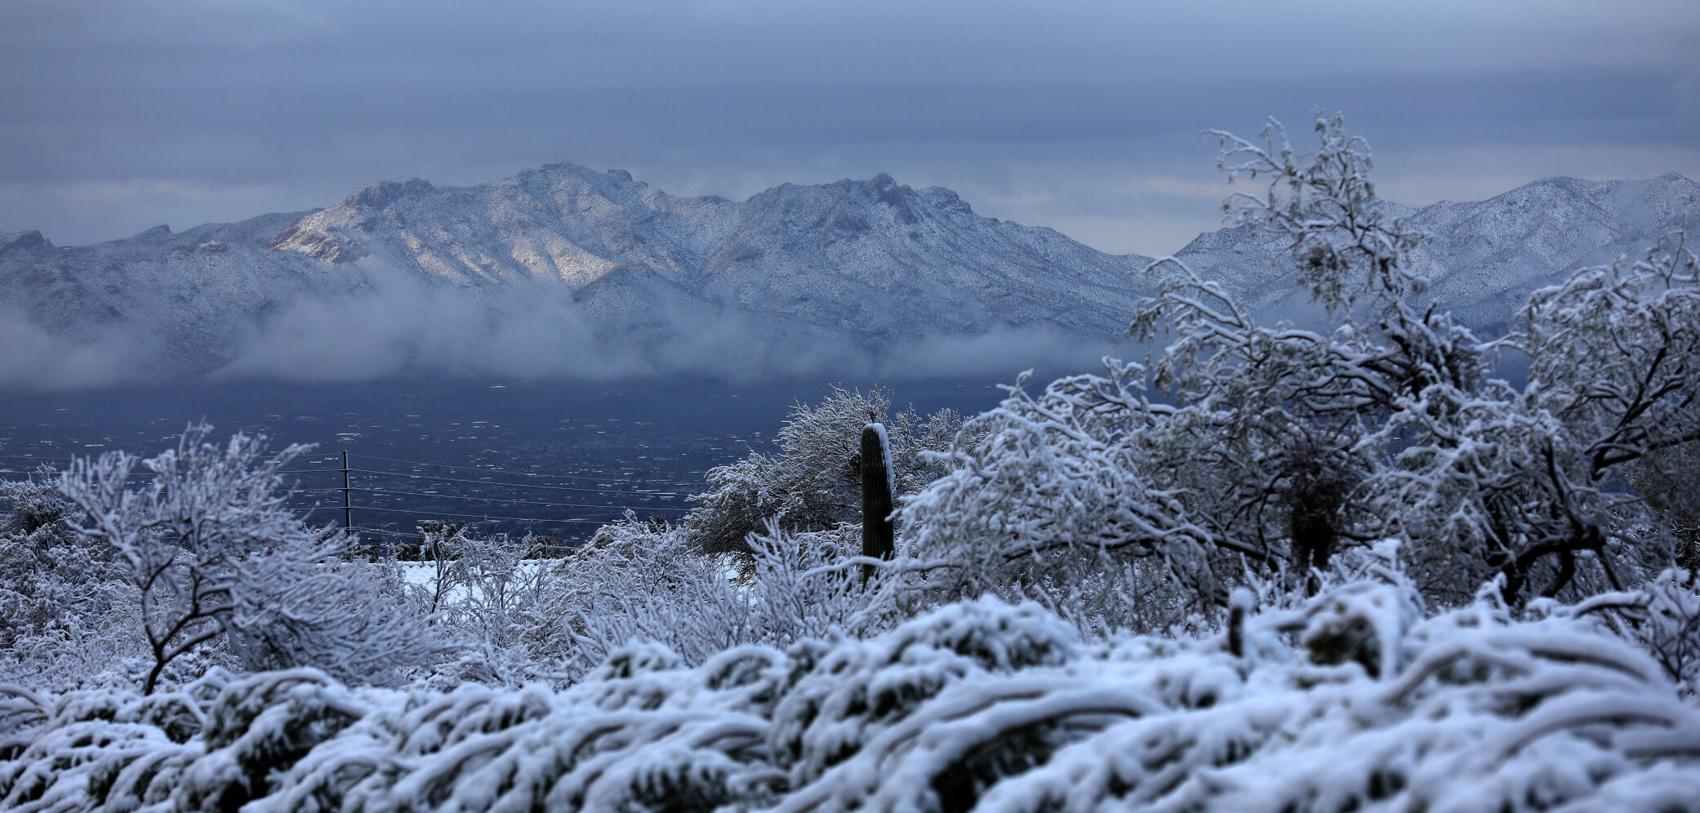 A bunch of photos of today's snow across Tucson ️💕 tucson life